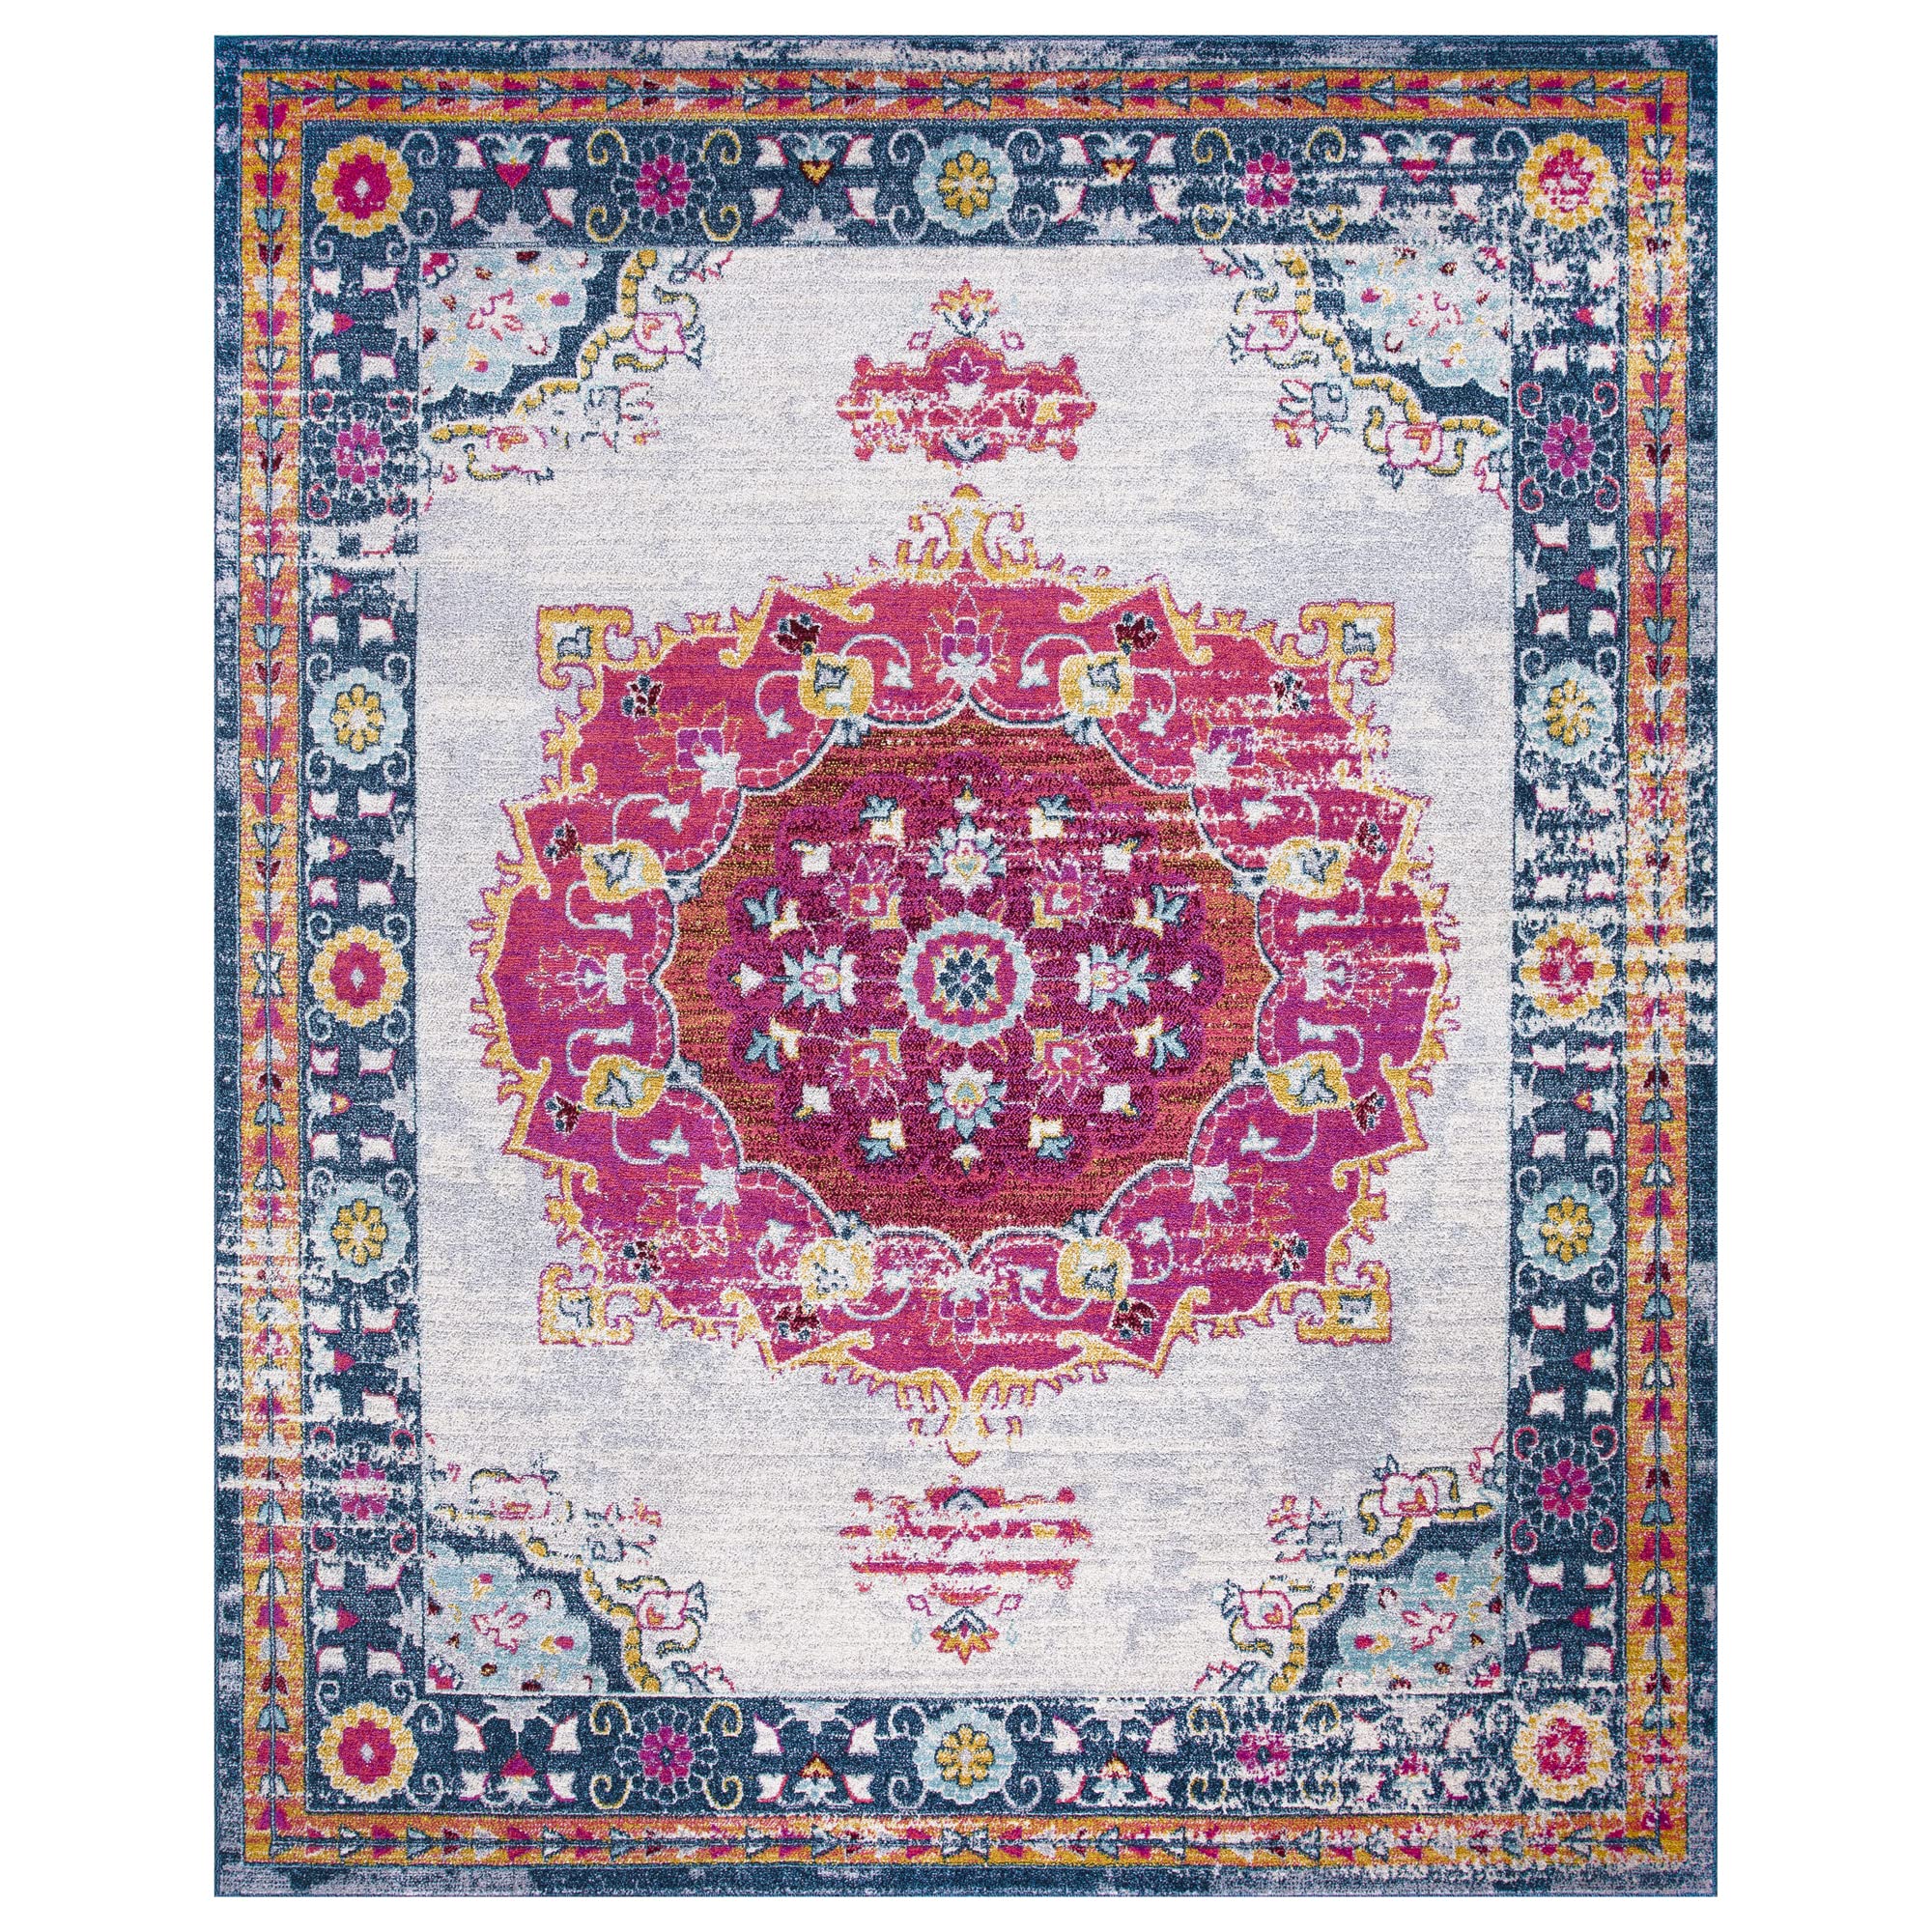 Signature Loom Shayna Moroccan Boho Area Rugs for Living Room or Area Rug Carpet for Bedroom Rug  - Very Good